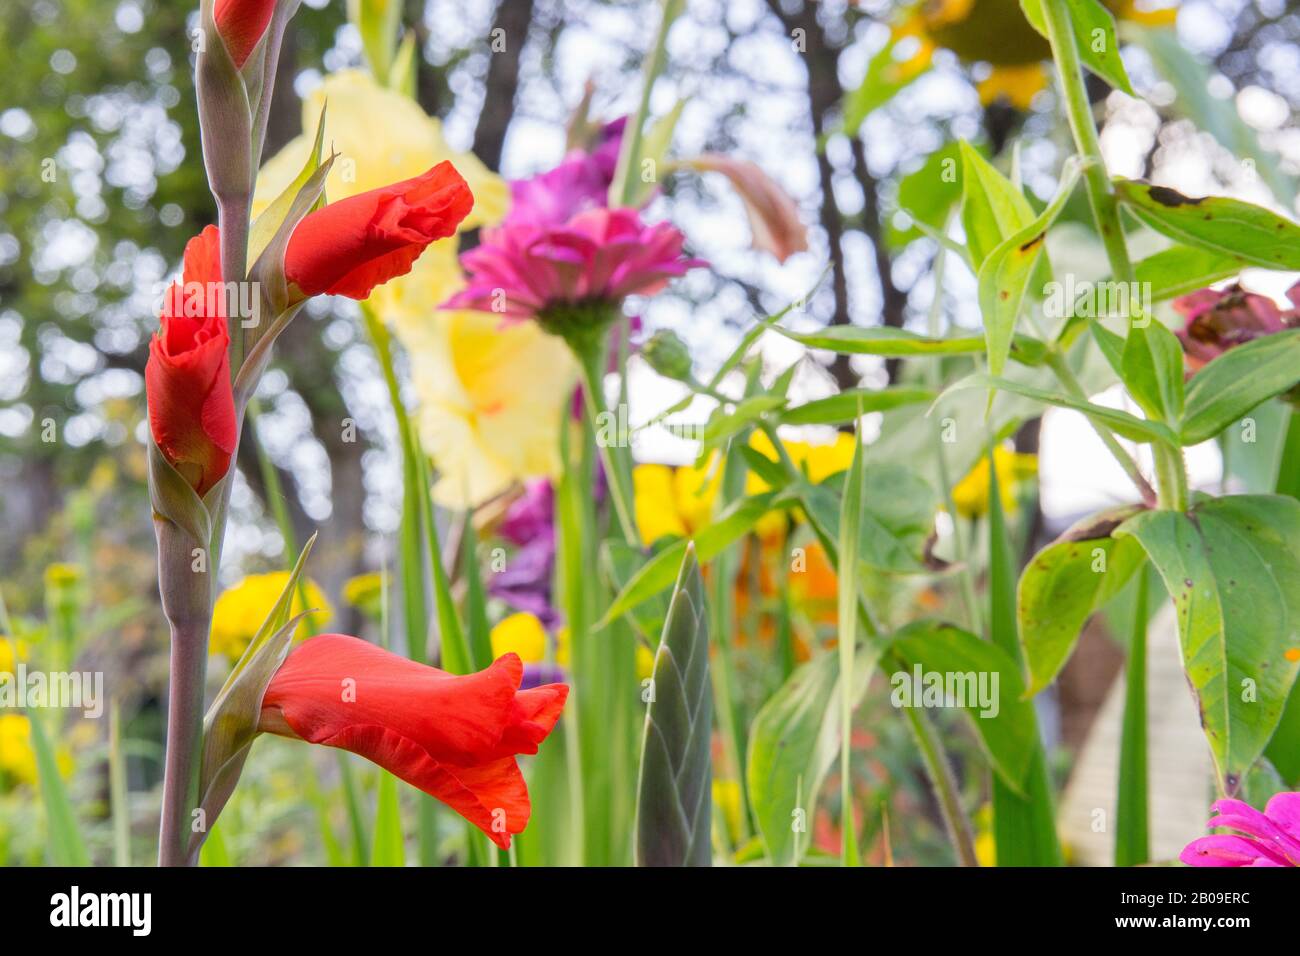 Bright, red, undiscovered gladiolus close-up in blooming garden. Autumn landscape. Nature background for decorations, postcards, wallpapers, design. Stock Photo